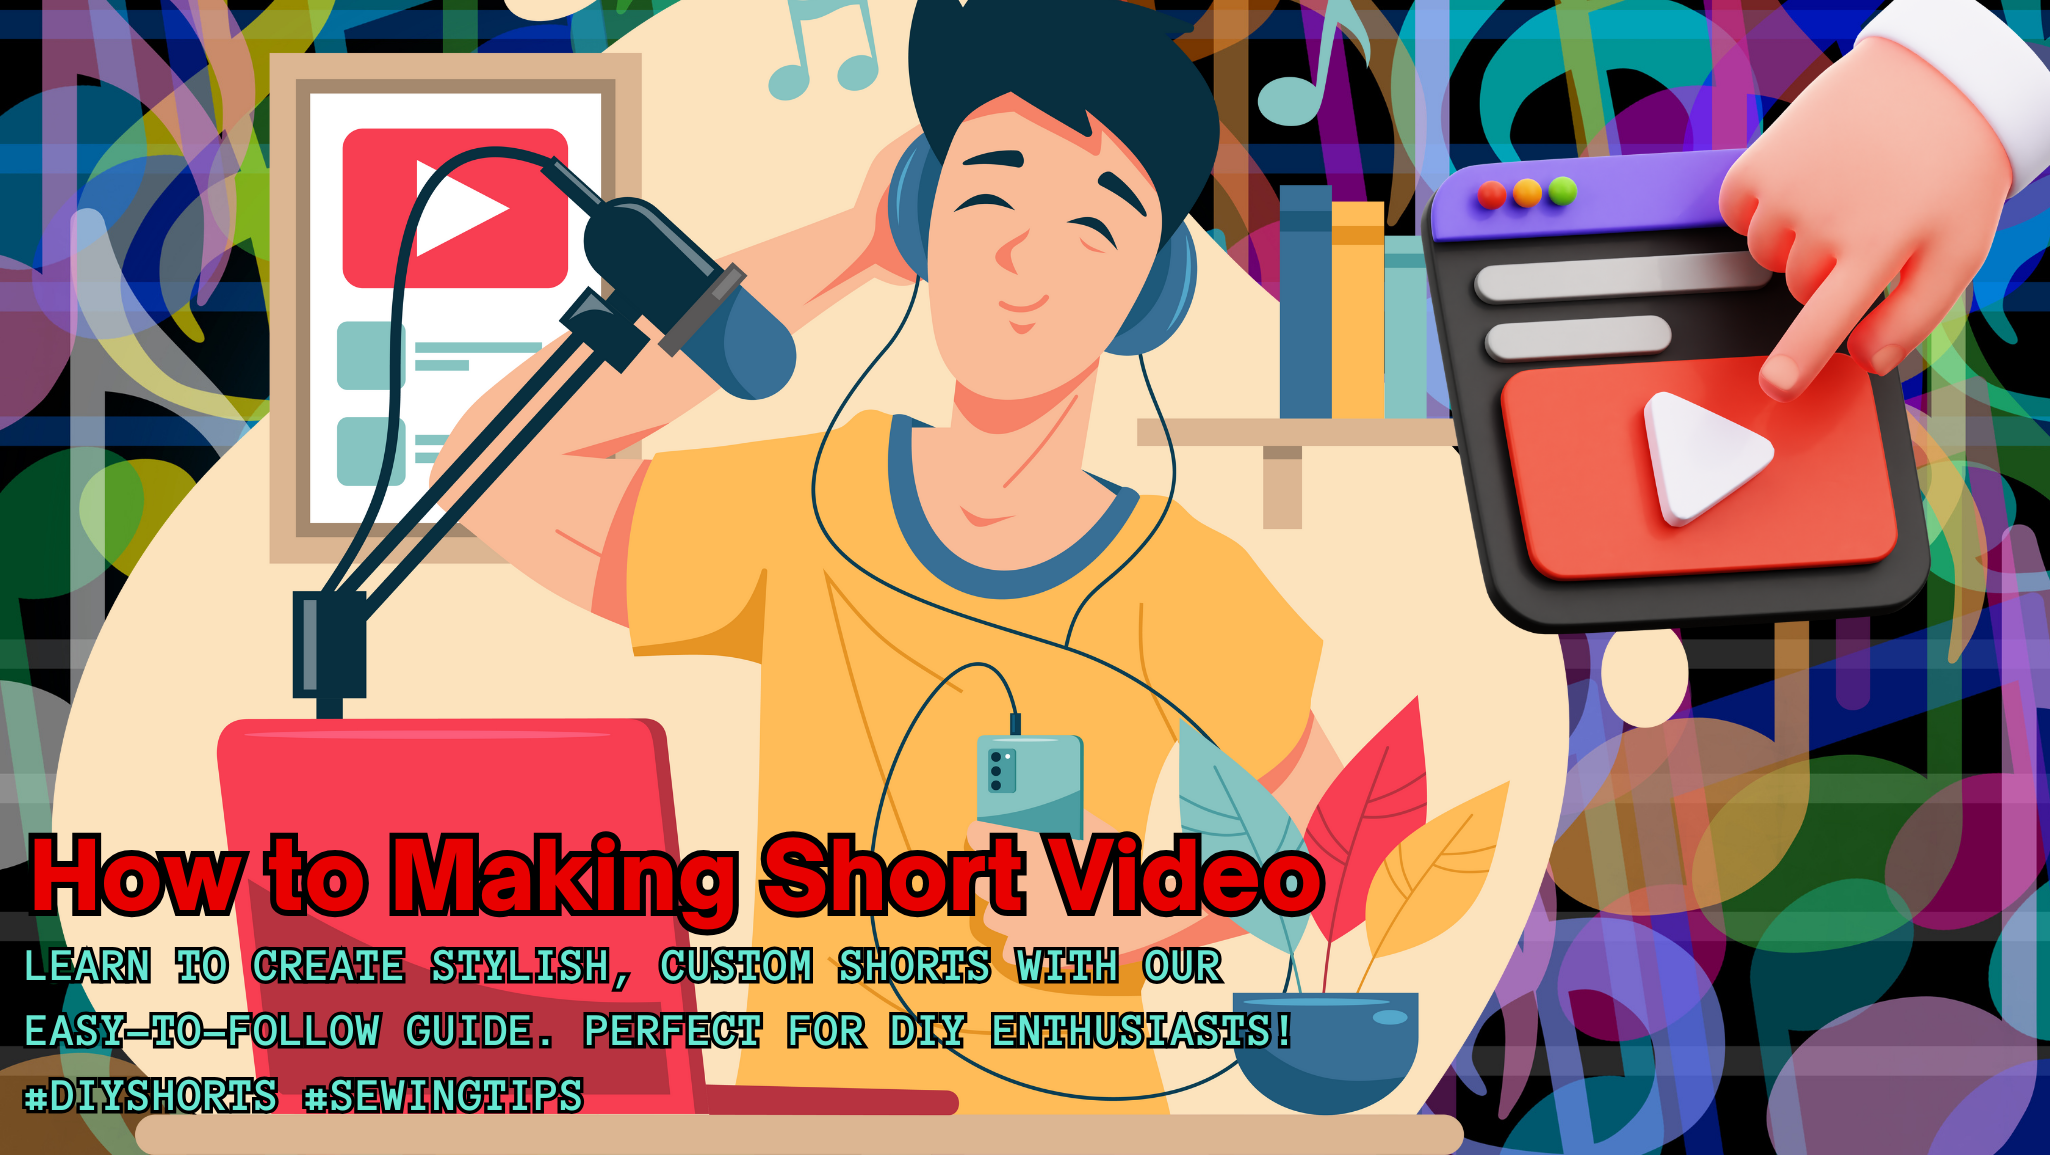 How to Making Short Video